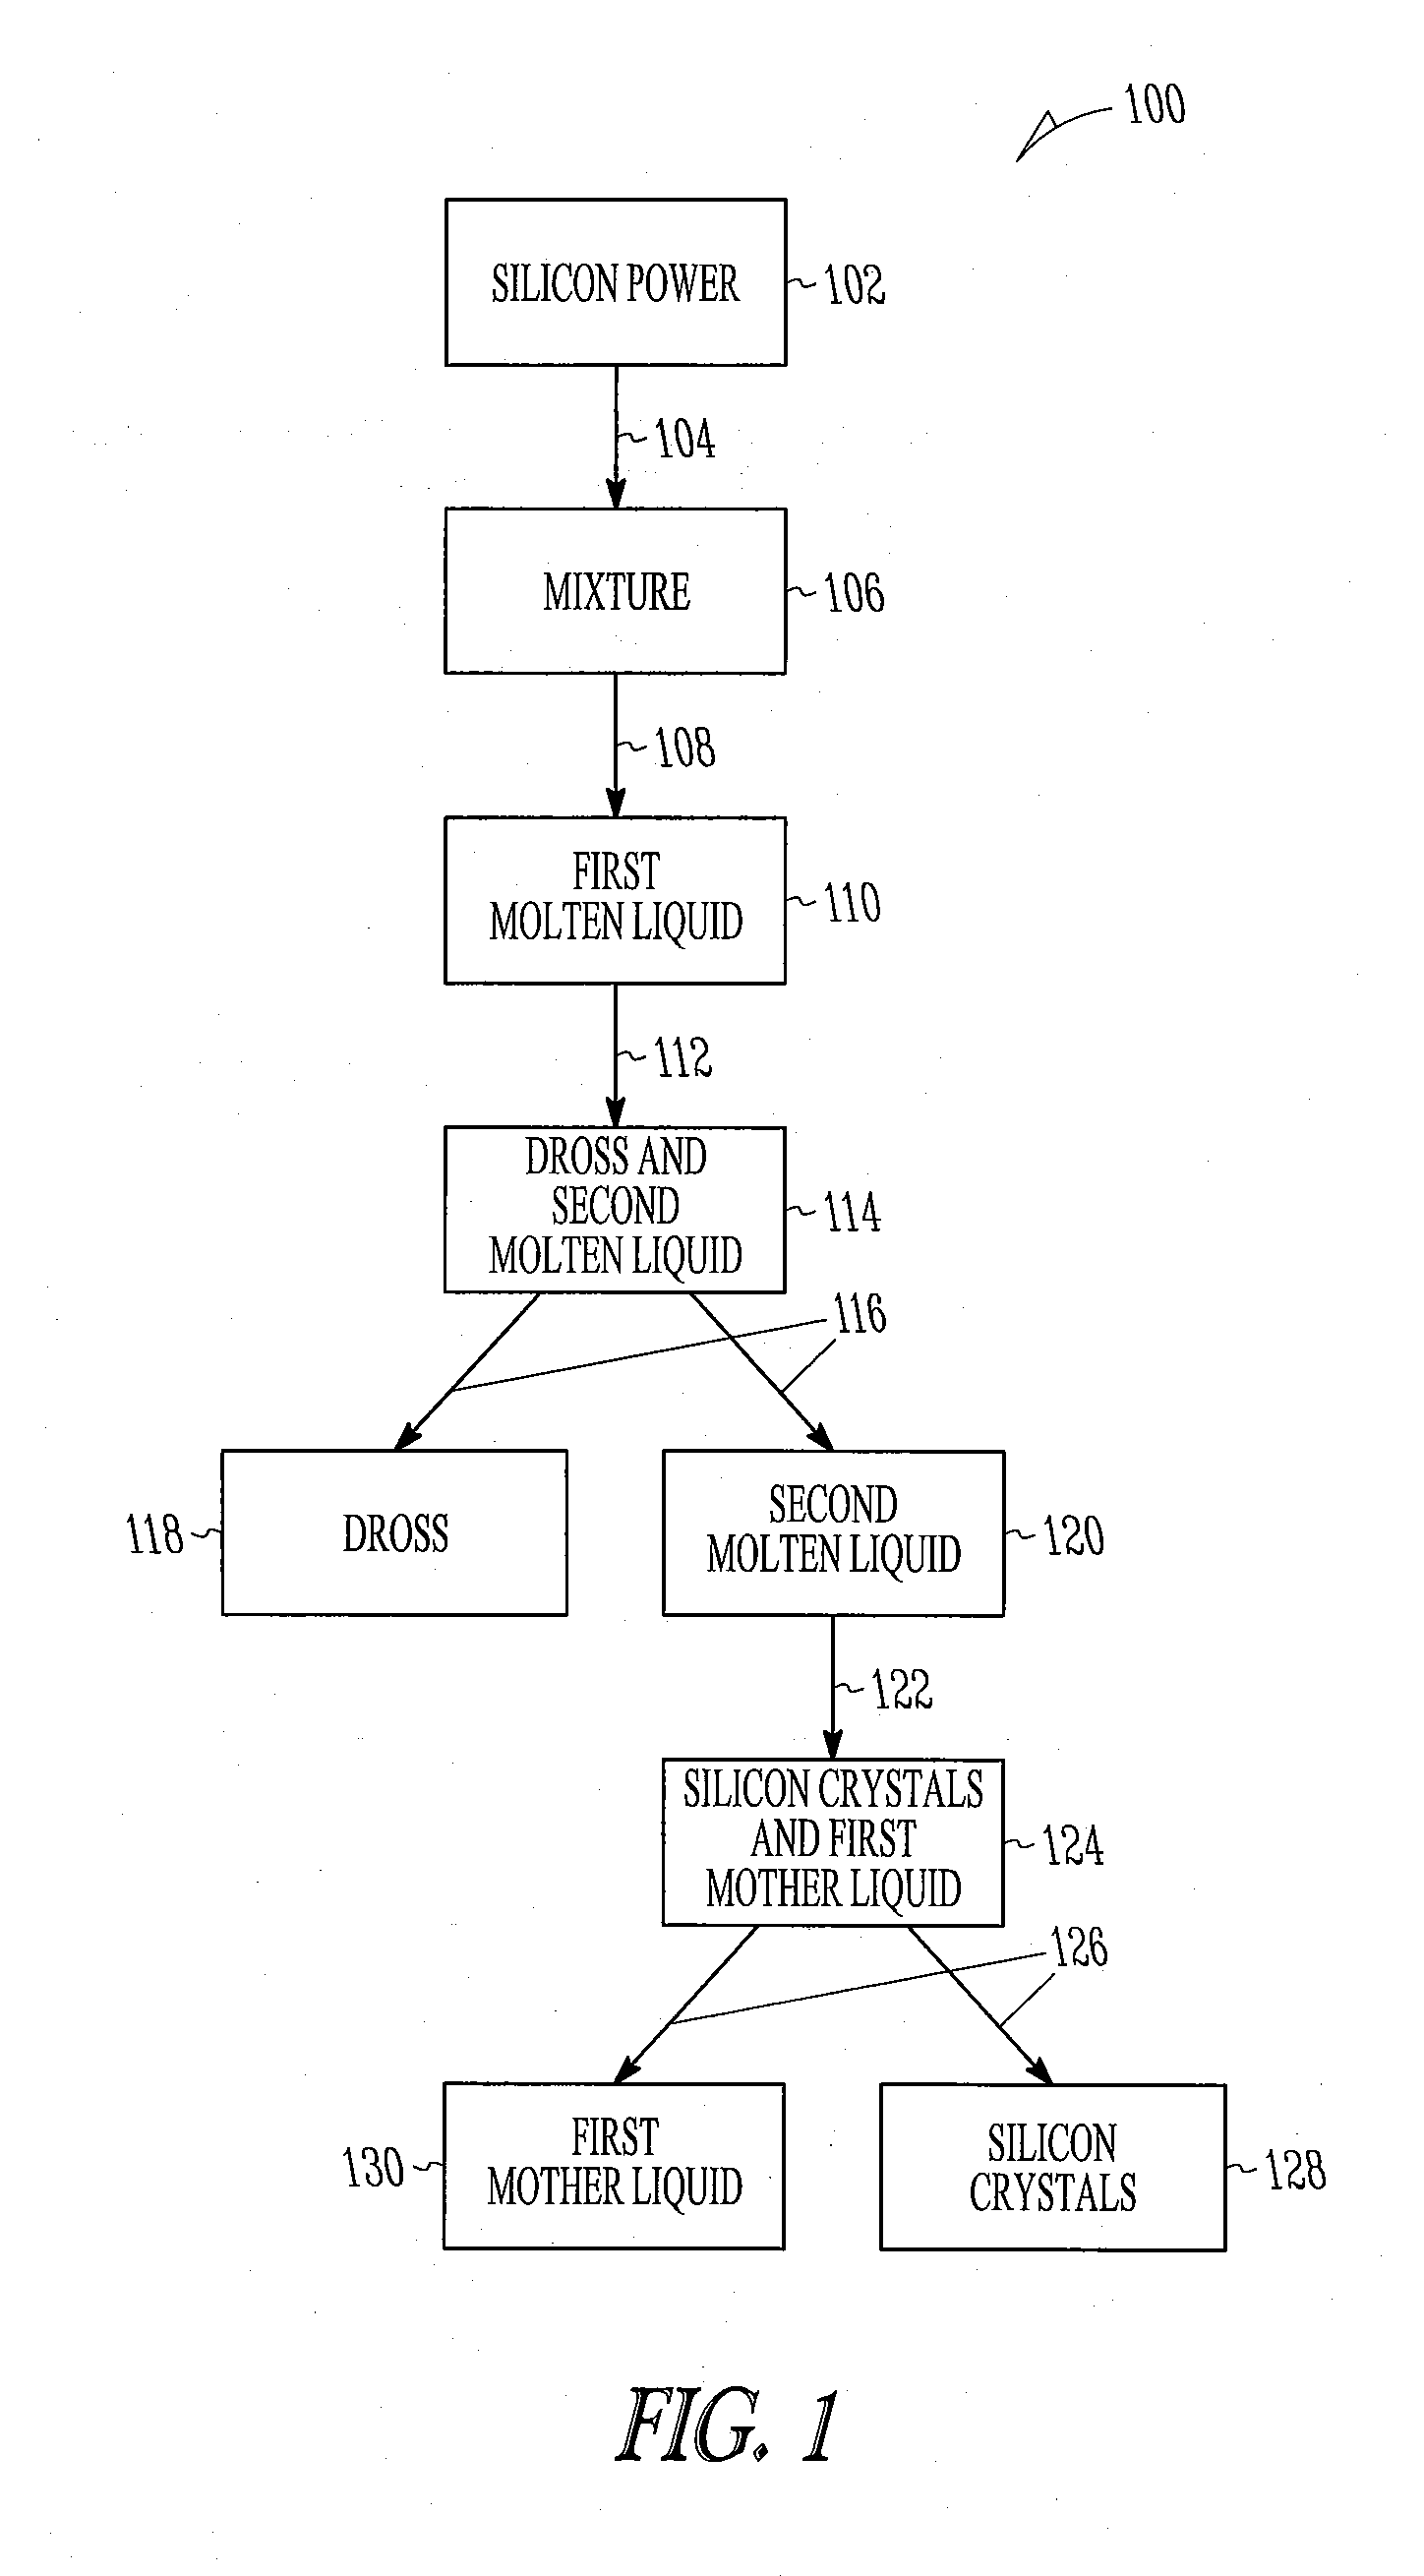 Method for processing silicon powder to obtain silicon crystals